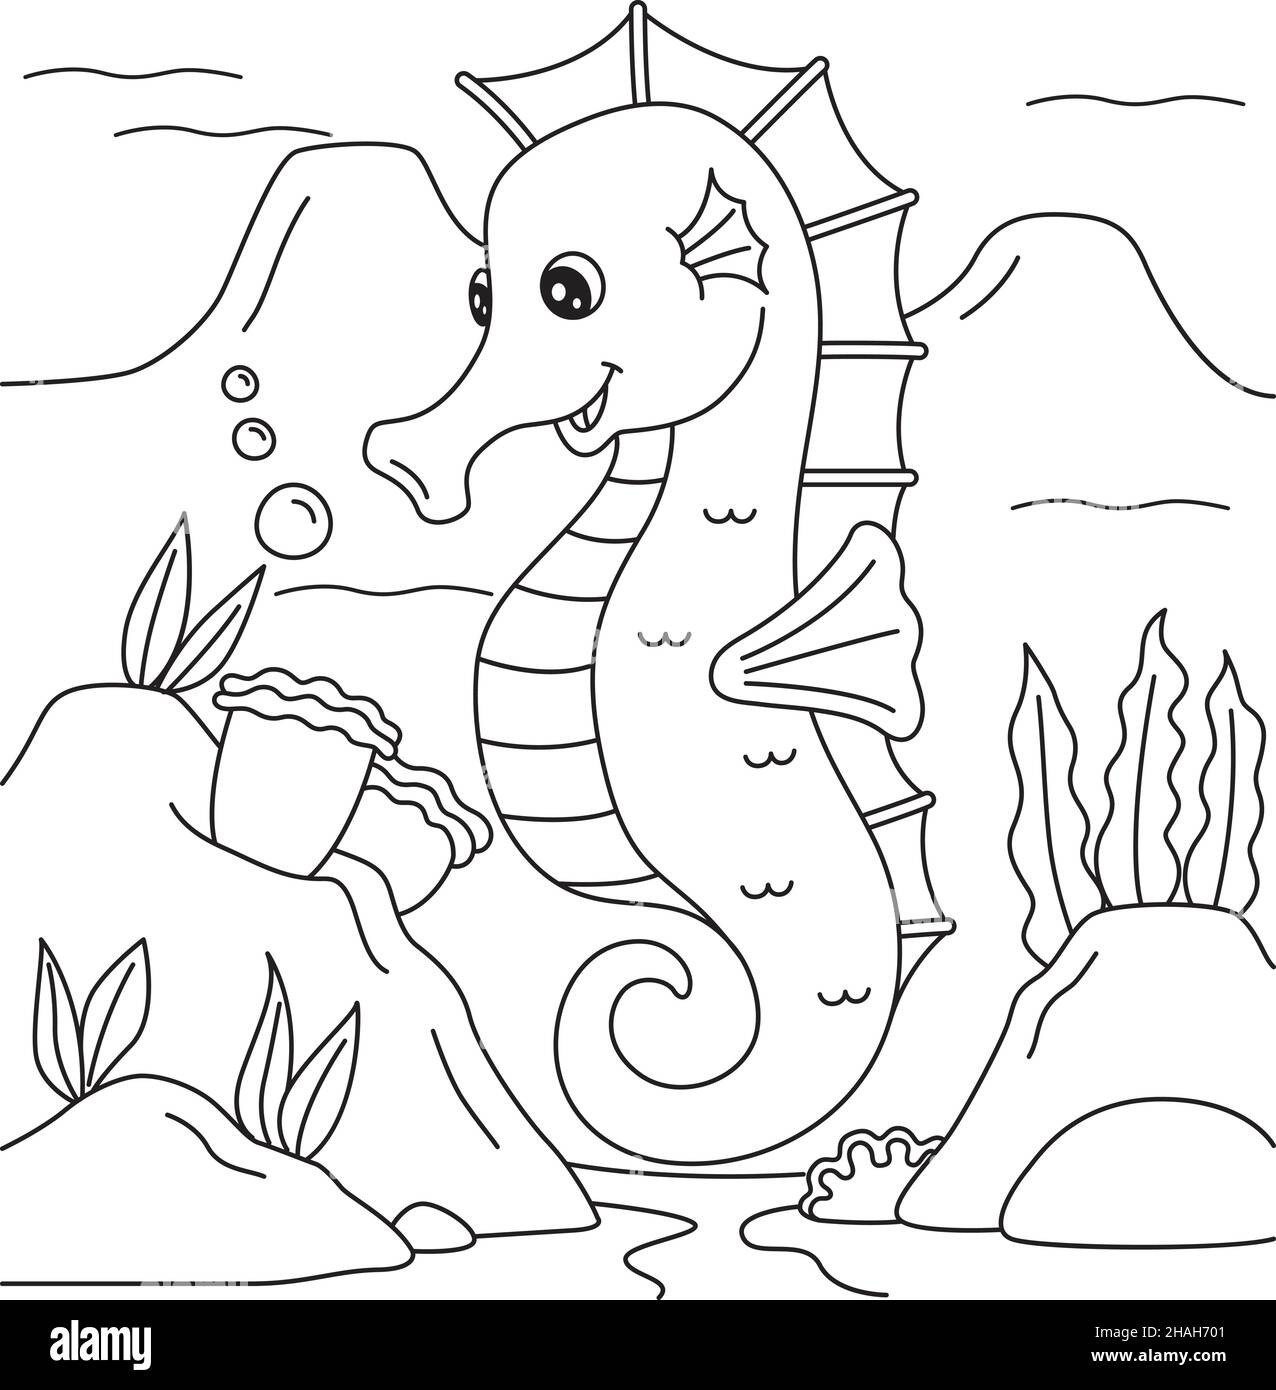 Seahorse coloring page for kids stock vector image art